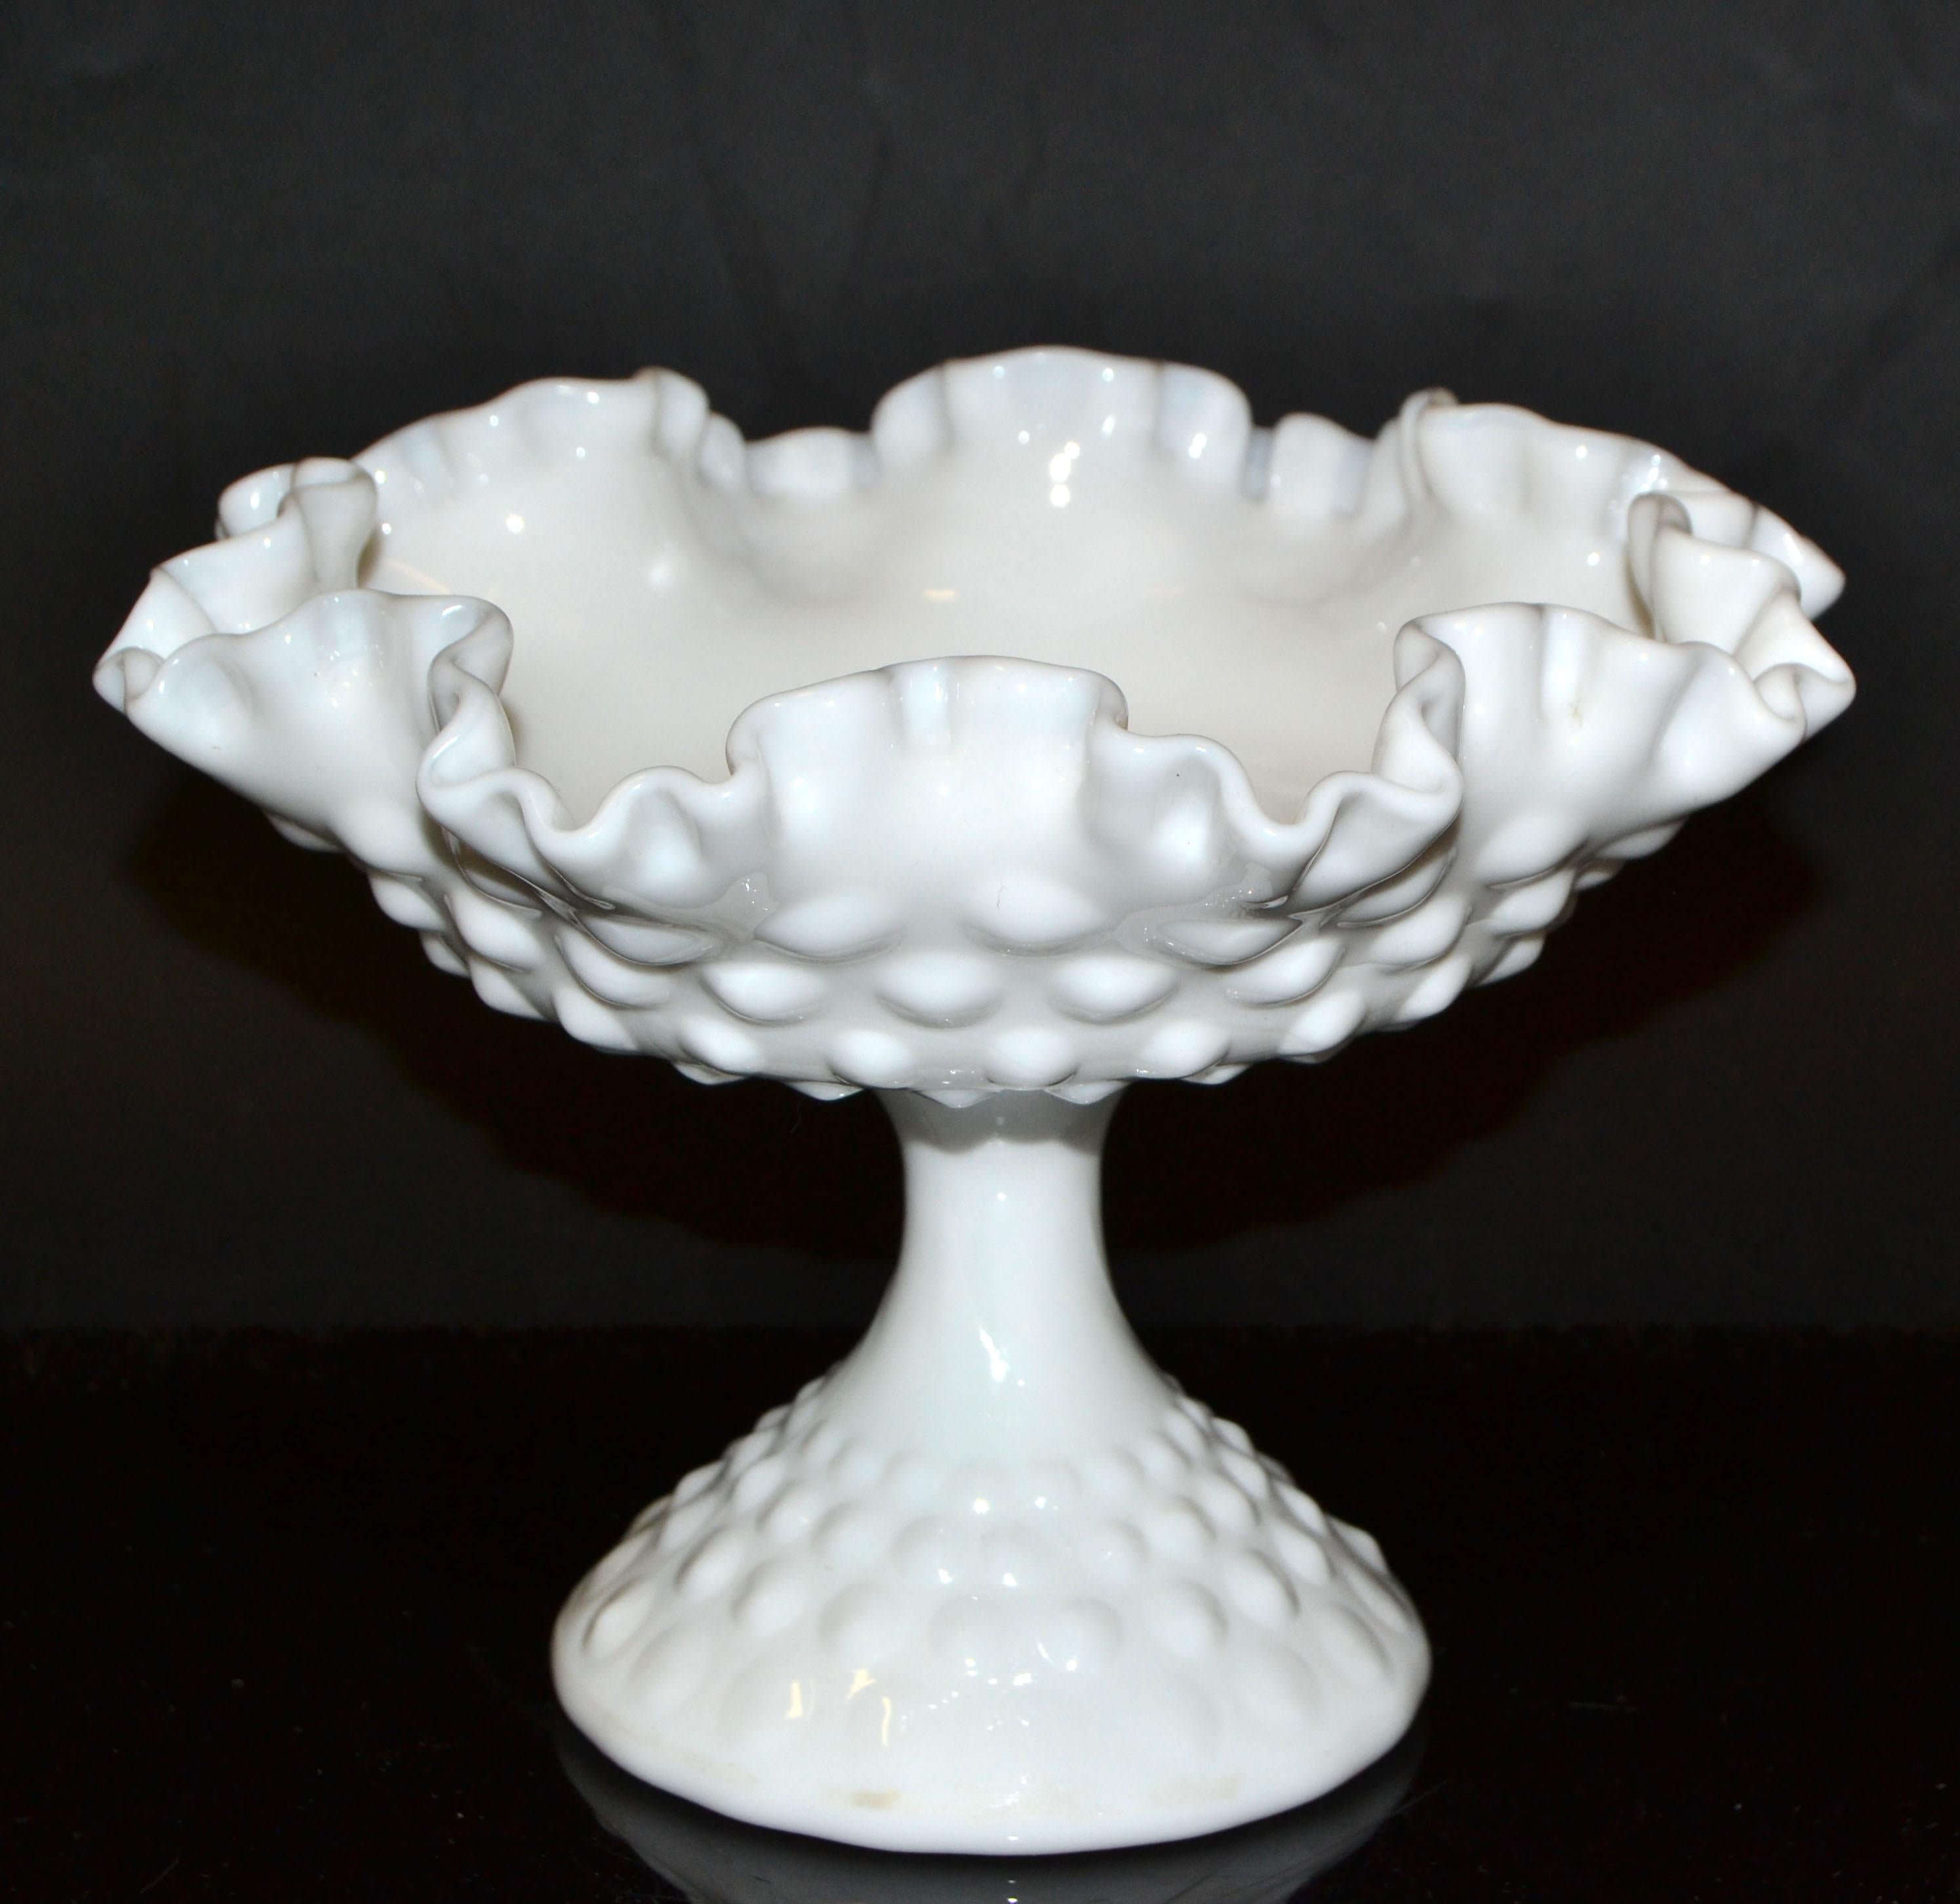 Fenton Hobnail White Ruffled Milk Glass Footed Bowl Candy Cream Serving Bowl 70s For Sale 1